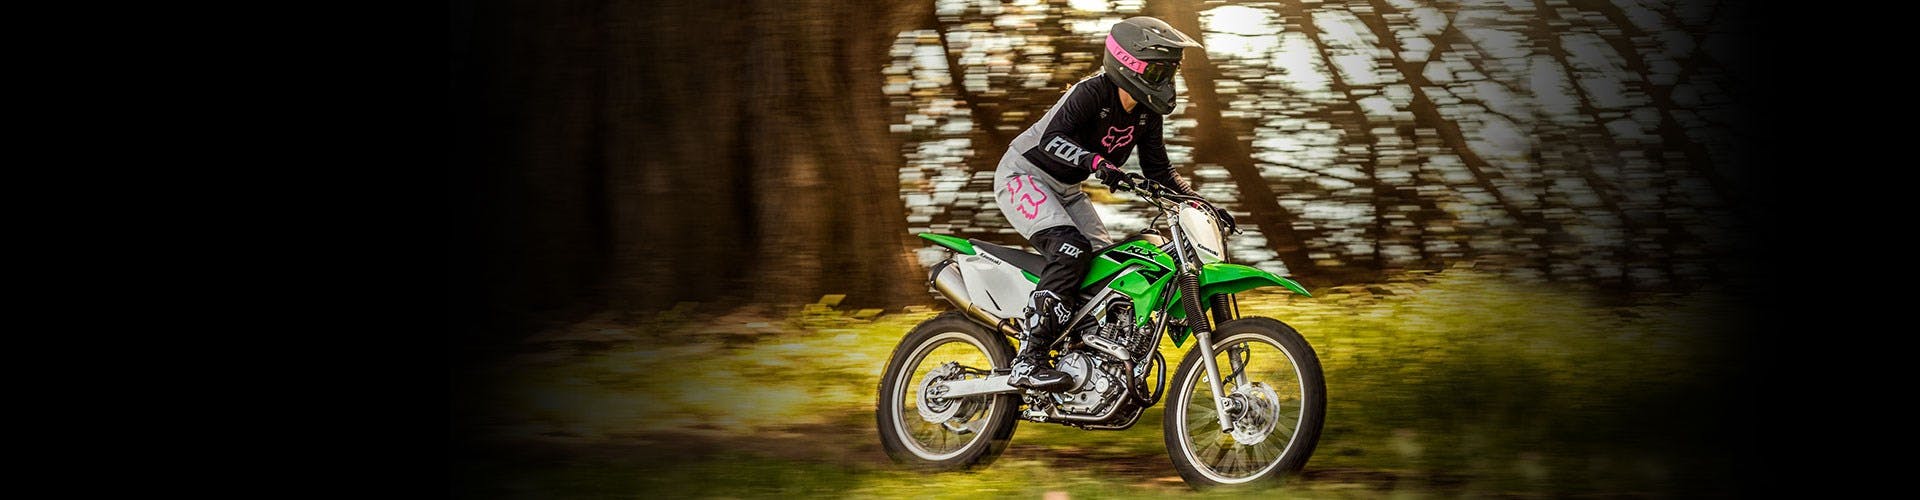 Kawasaki KLX230R S in lime green colour off track